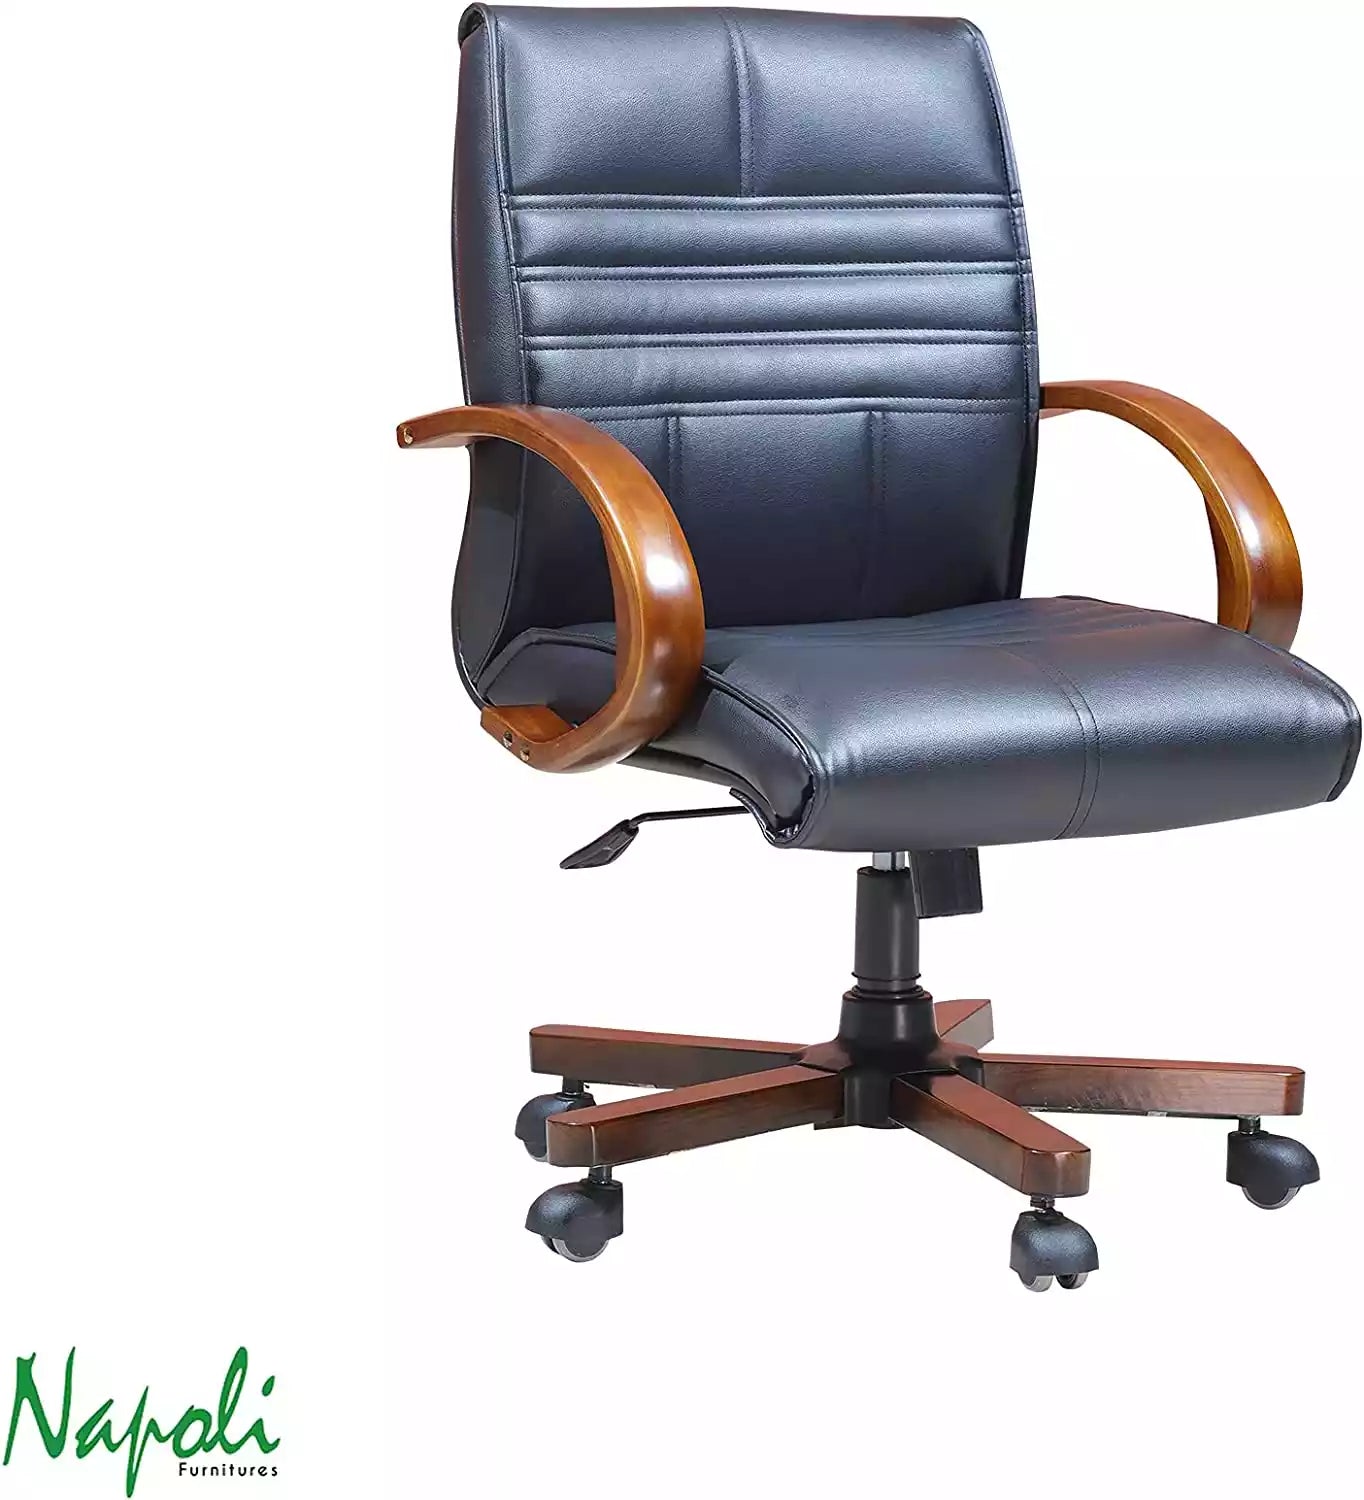 Office Chair with adjustable Height And Lumbar Support, Black Color